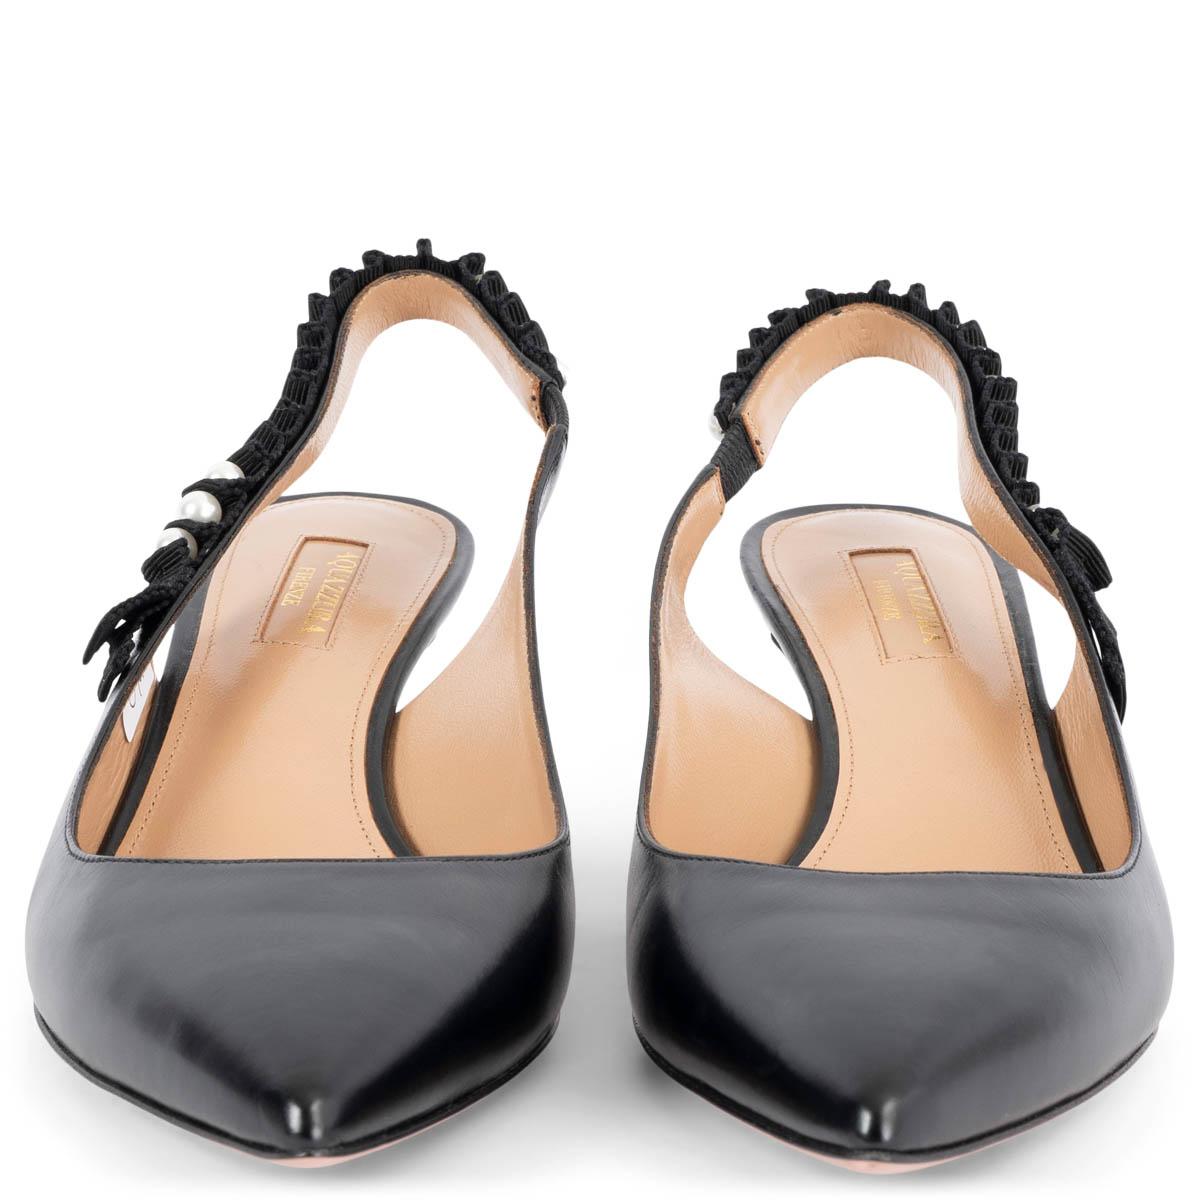 100% authentic Aquazzura Pearl 45 embellished pointed-toe slingback pumps in black smooth calfskin. Brand new. Come with dust bag. 

Measurements
Imprinted Size	38.5
Shoe Size	38.5
Inside Sole	25.5cm (9.9in)
Width	7.5cm (2.9in)
Heel	4.5cm